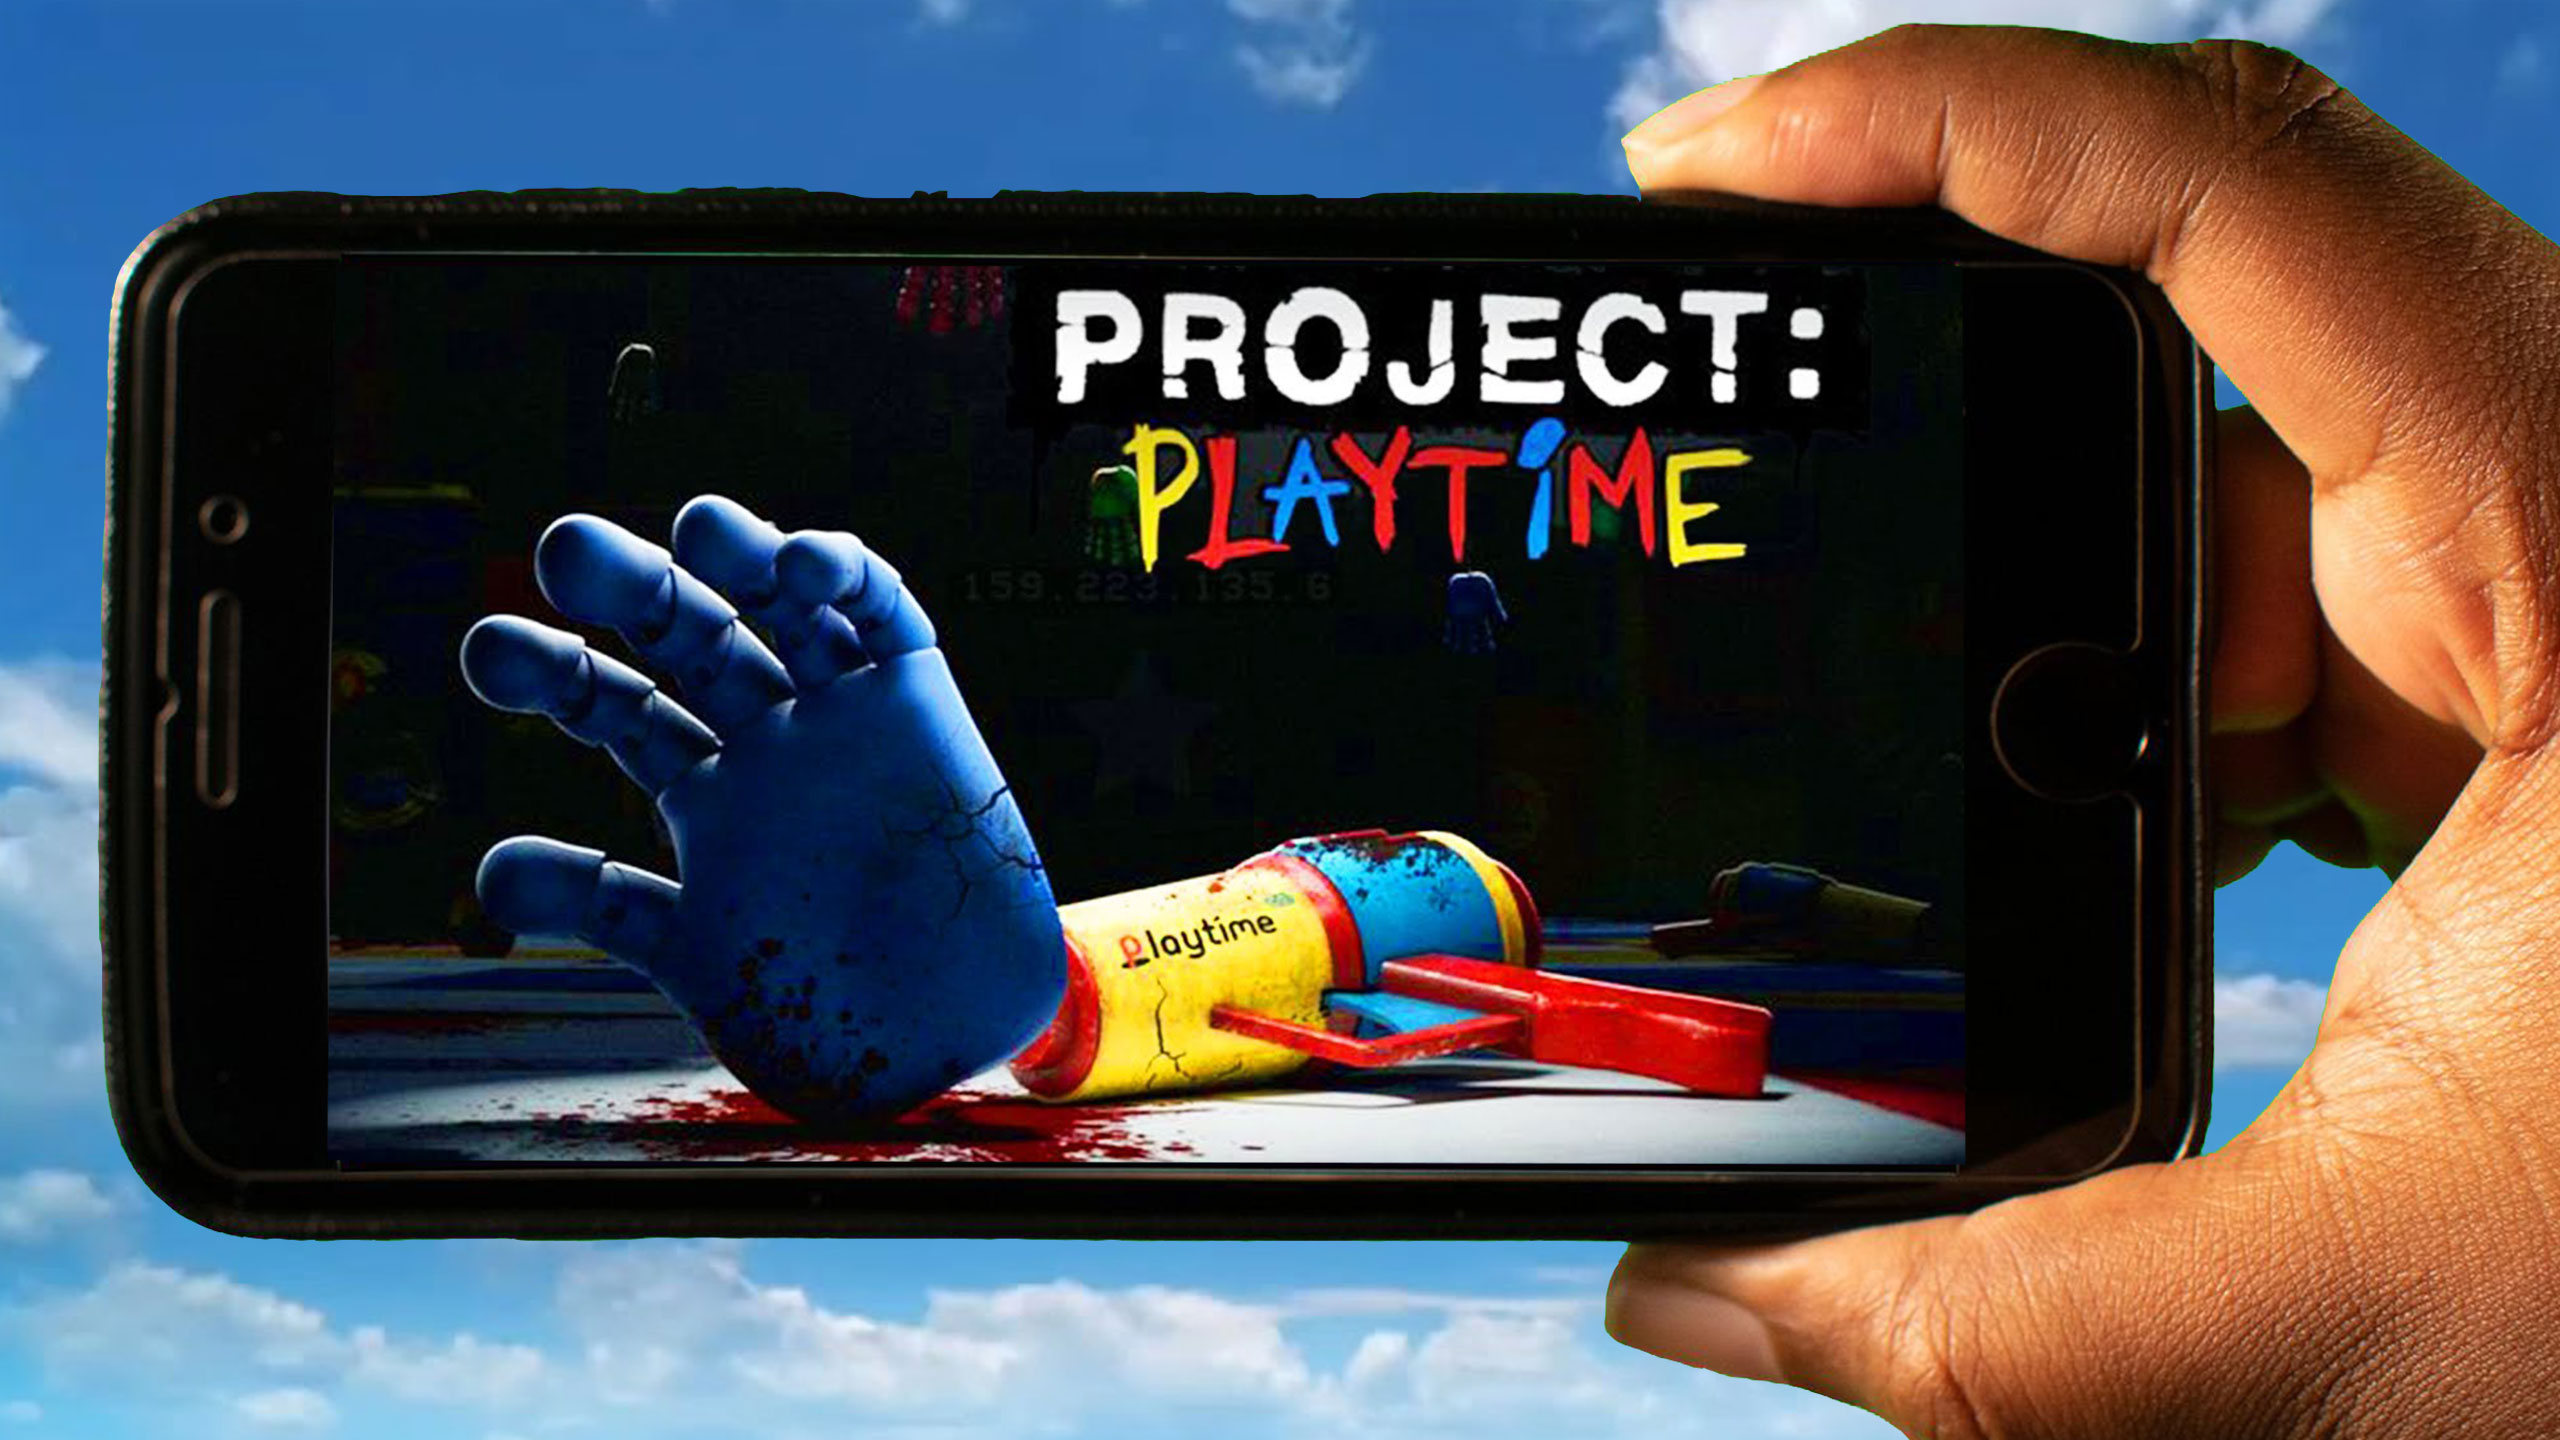 Project Playtime Mobile Test Version Game - Android Gameplay Walkthrough 